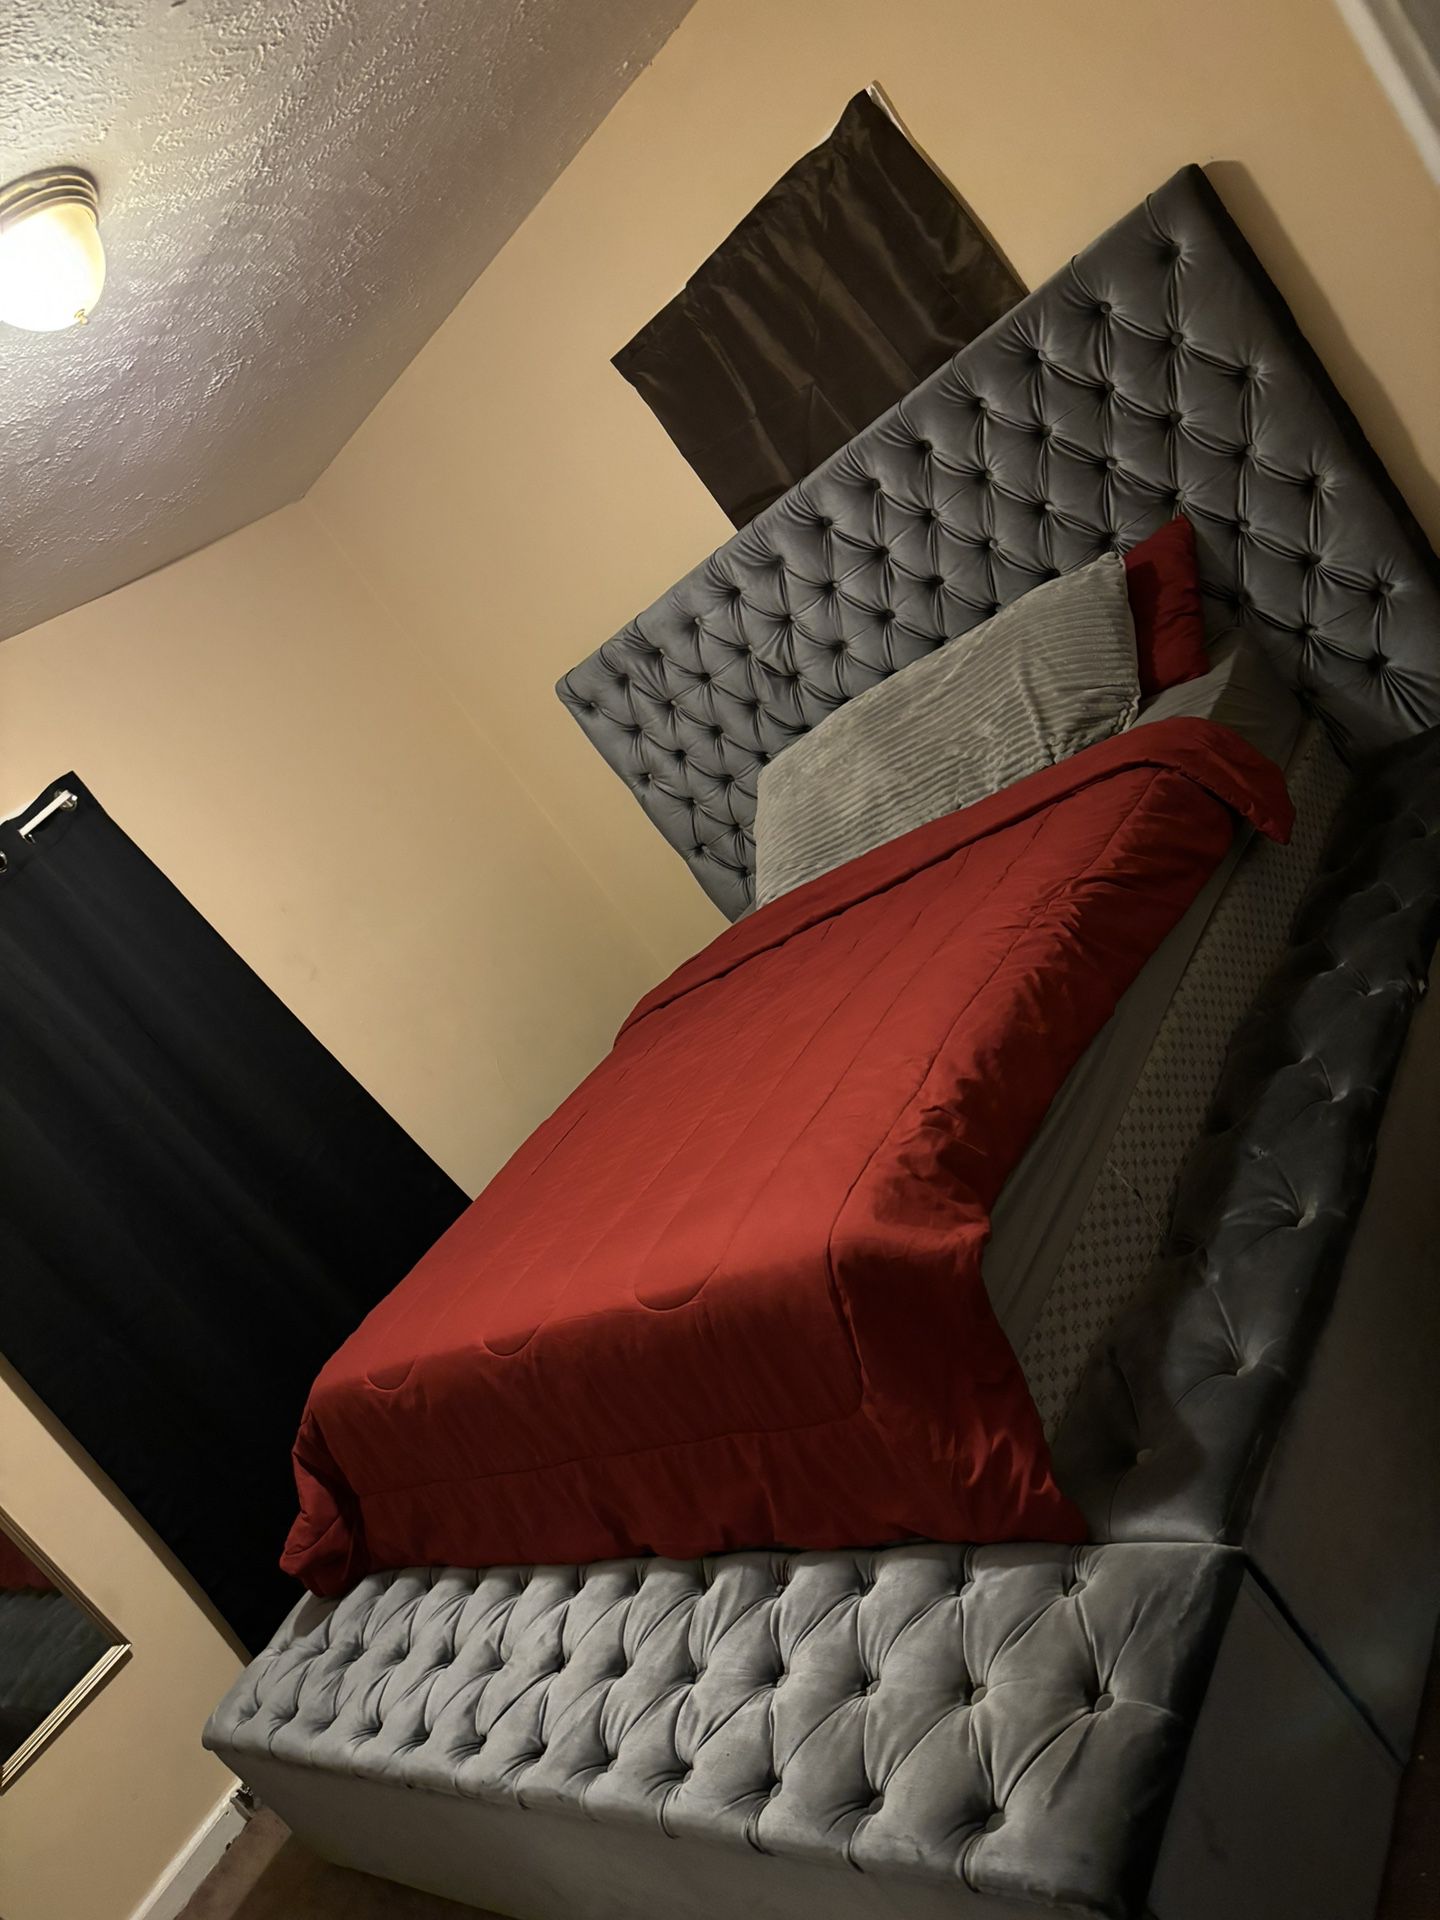 Brand new King Size Bed Frame With Couches